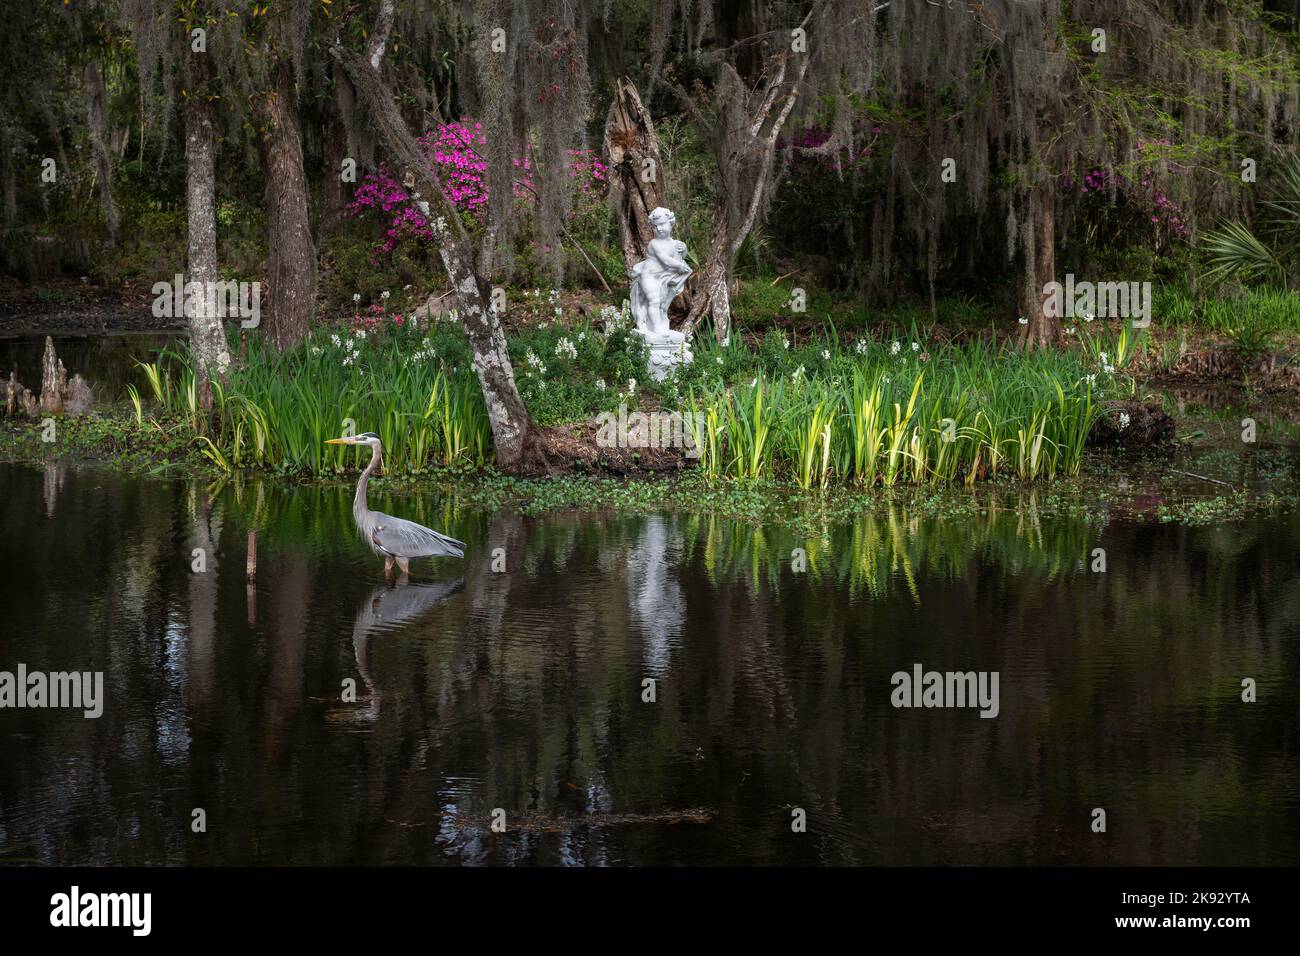 Great blue heron hunting in a garden located in a South Carolina swamp Stock Photo